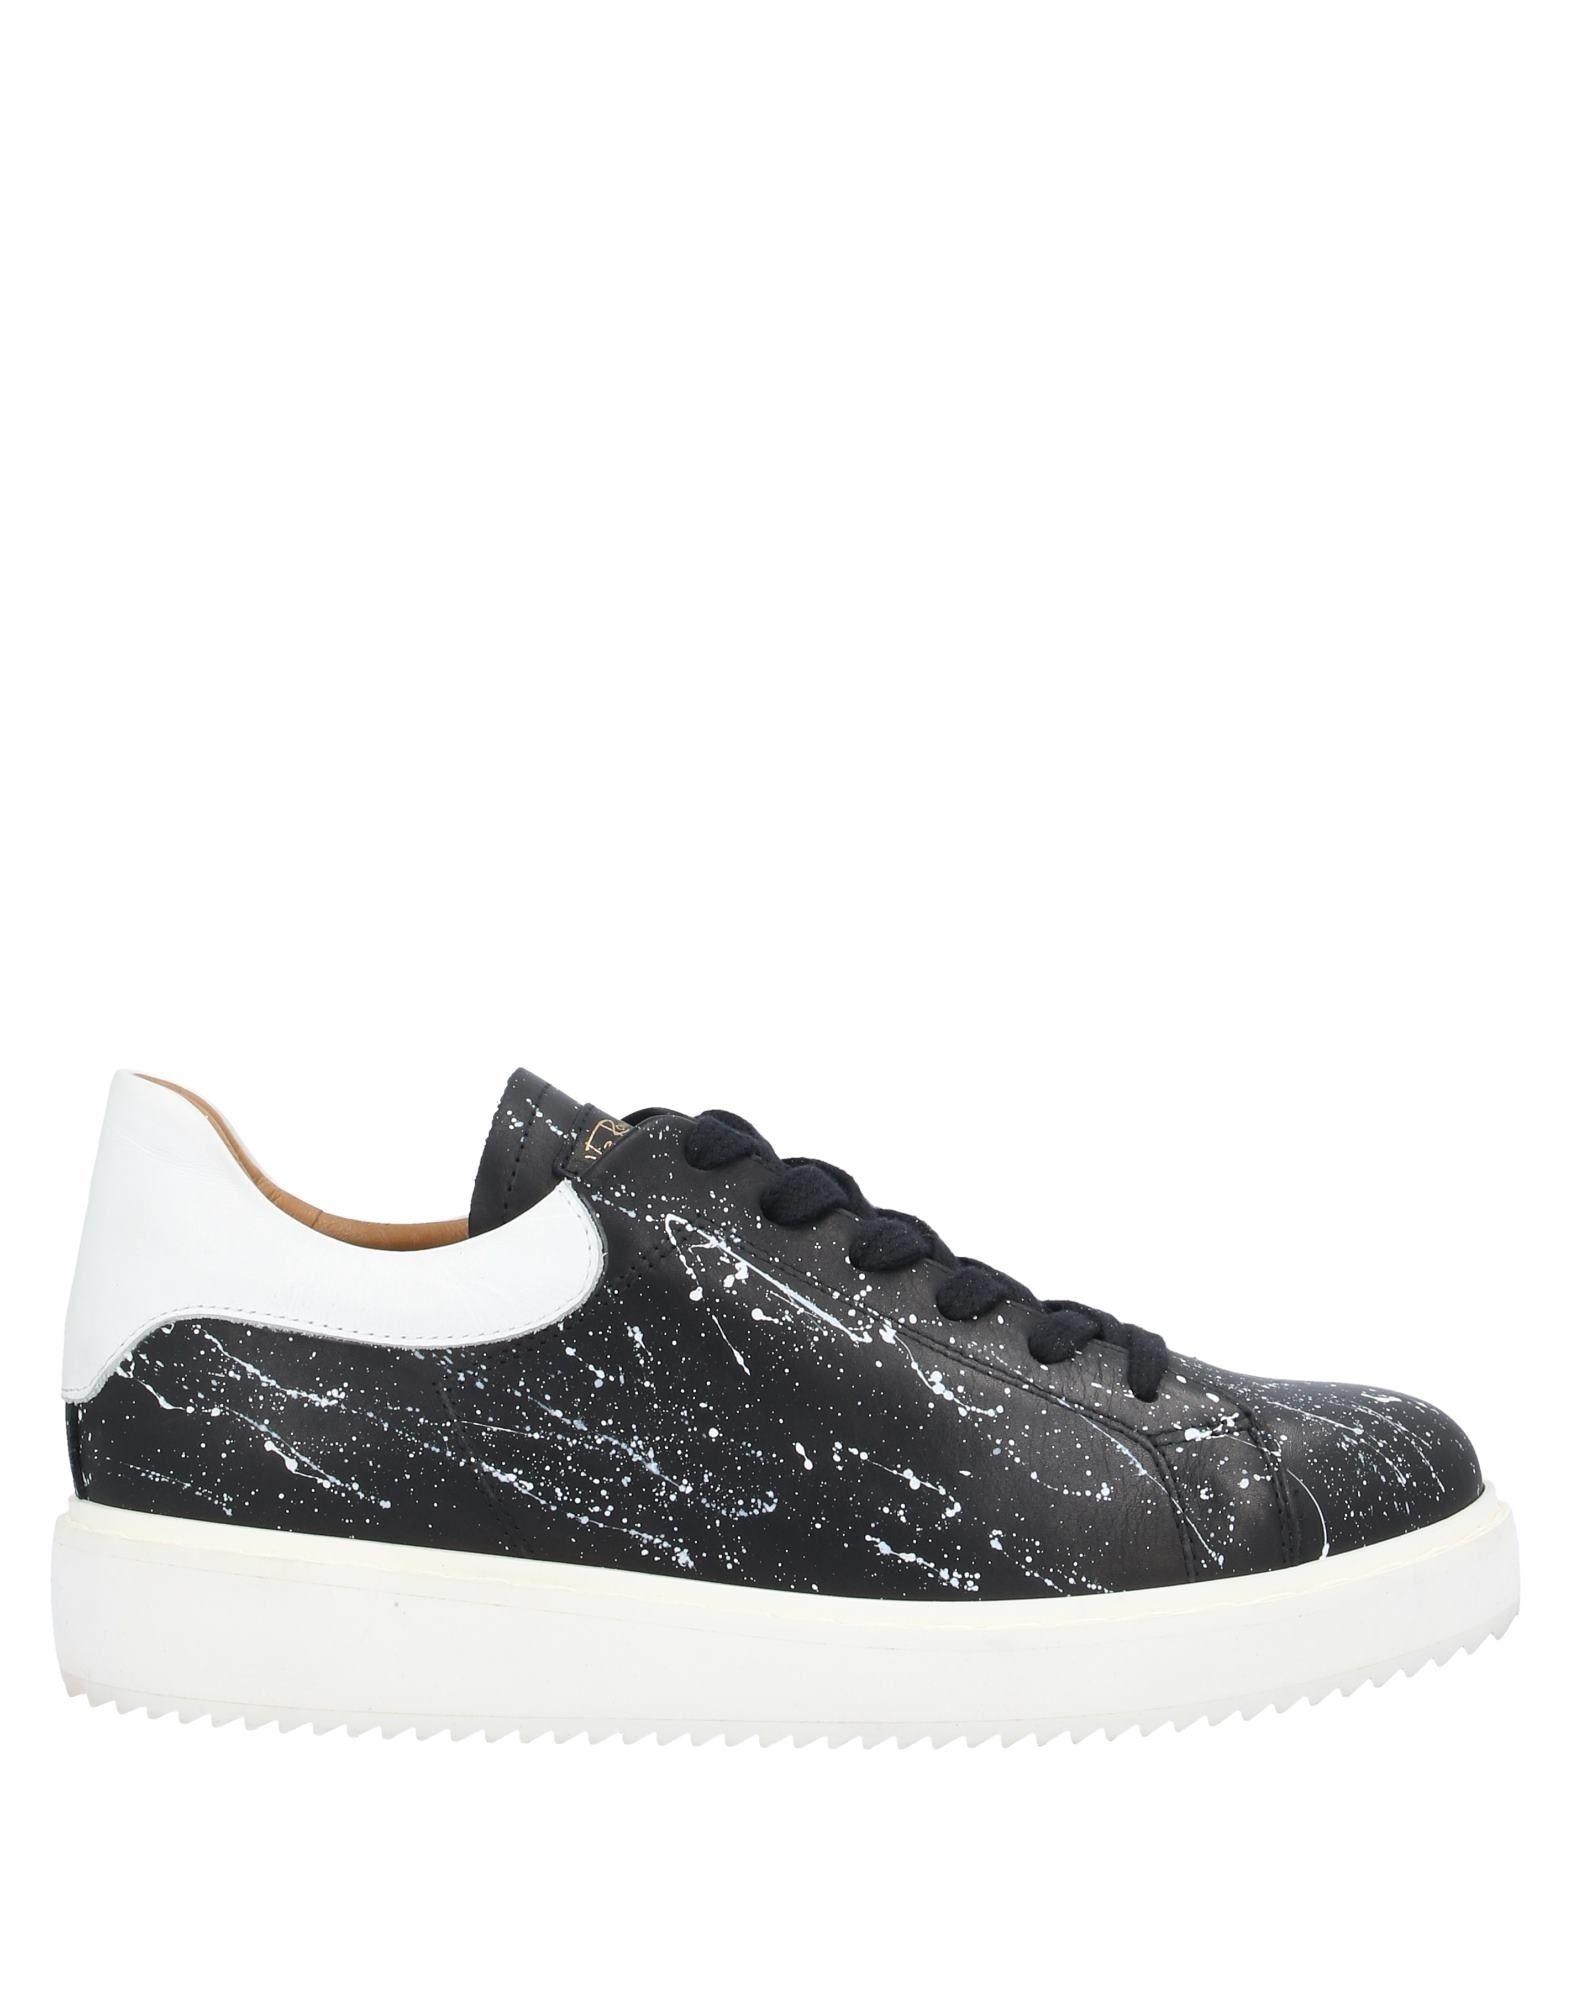 Via Roma 15 Rubber Low-tops & Sneakers in Black - Lyst